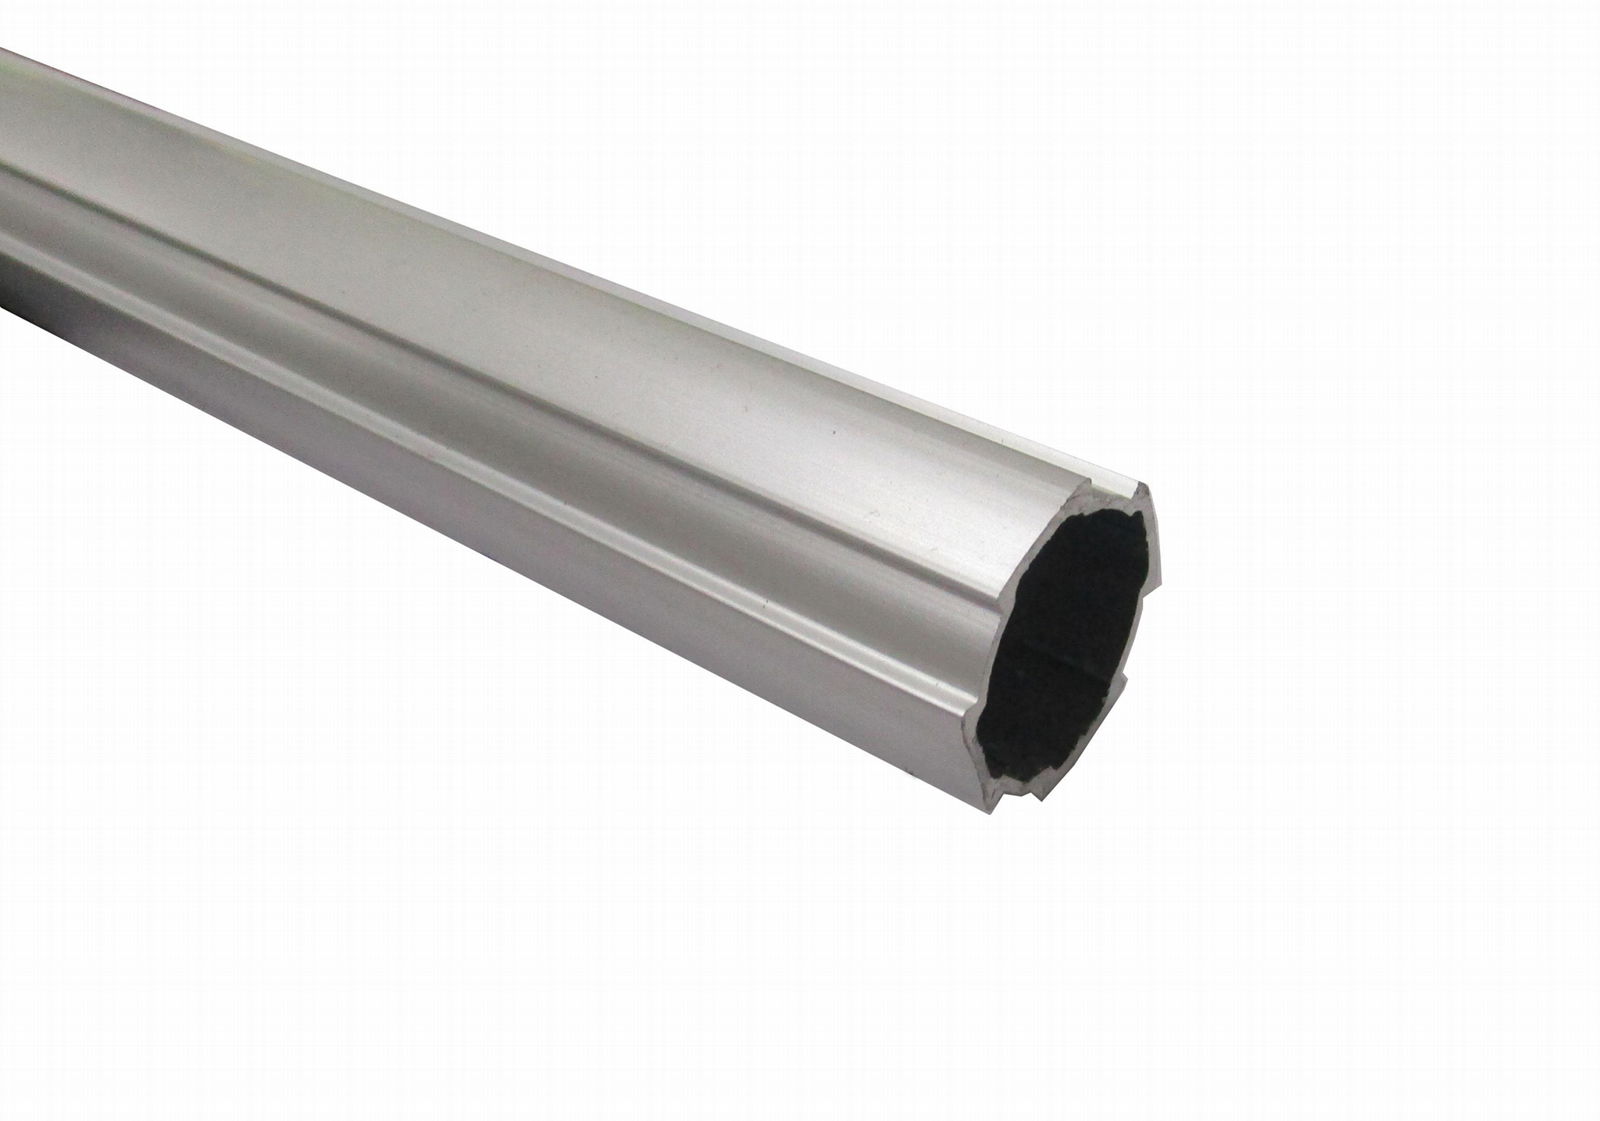 Hot Sale China Manufacture 28mm Aluminum Profile Pipe Thickness 1.2mm For Alumin